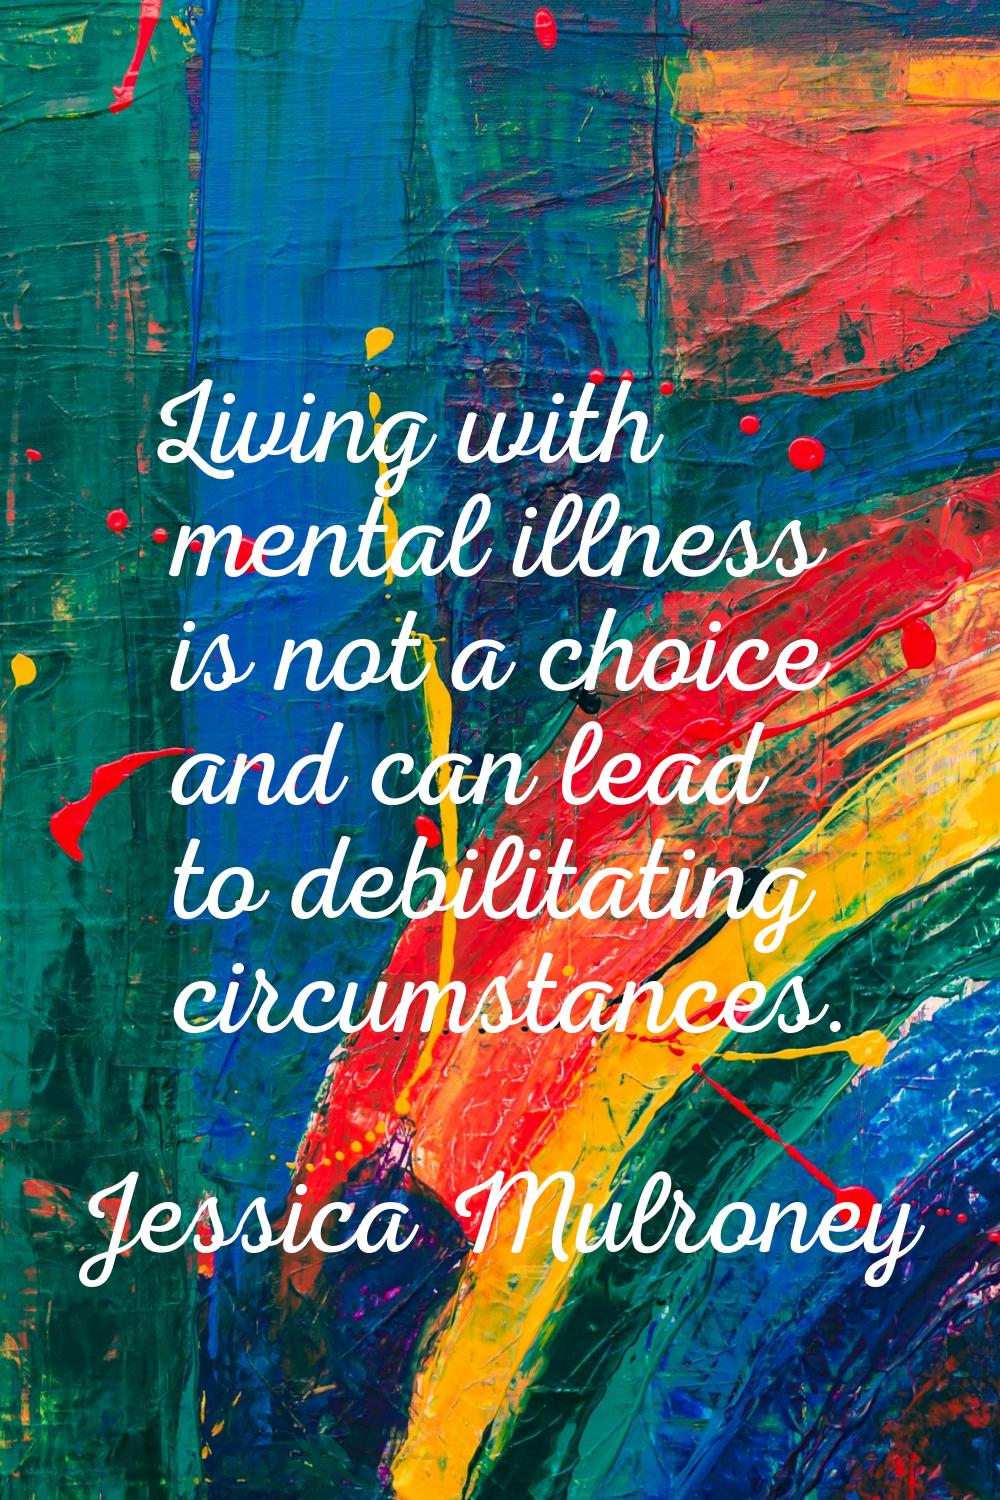 Living with mental illness is not a choice and can lead to debilitating circumstances.